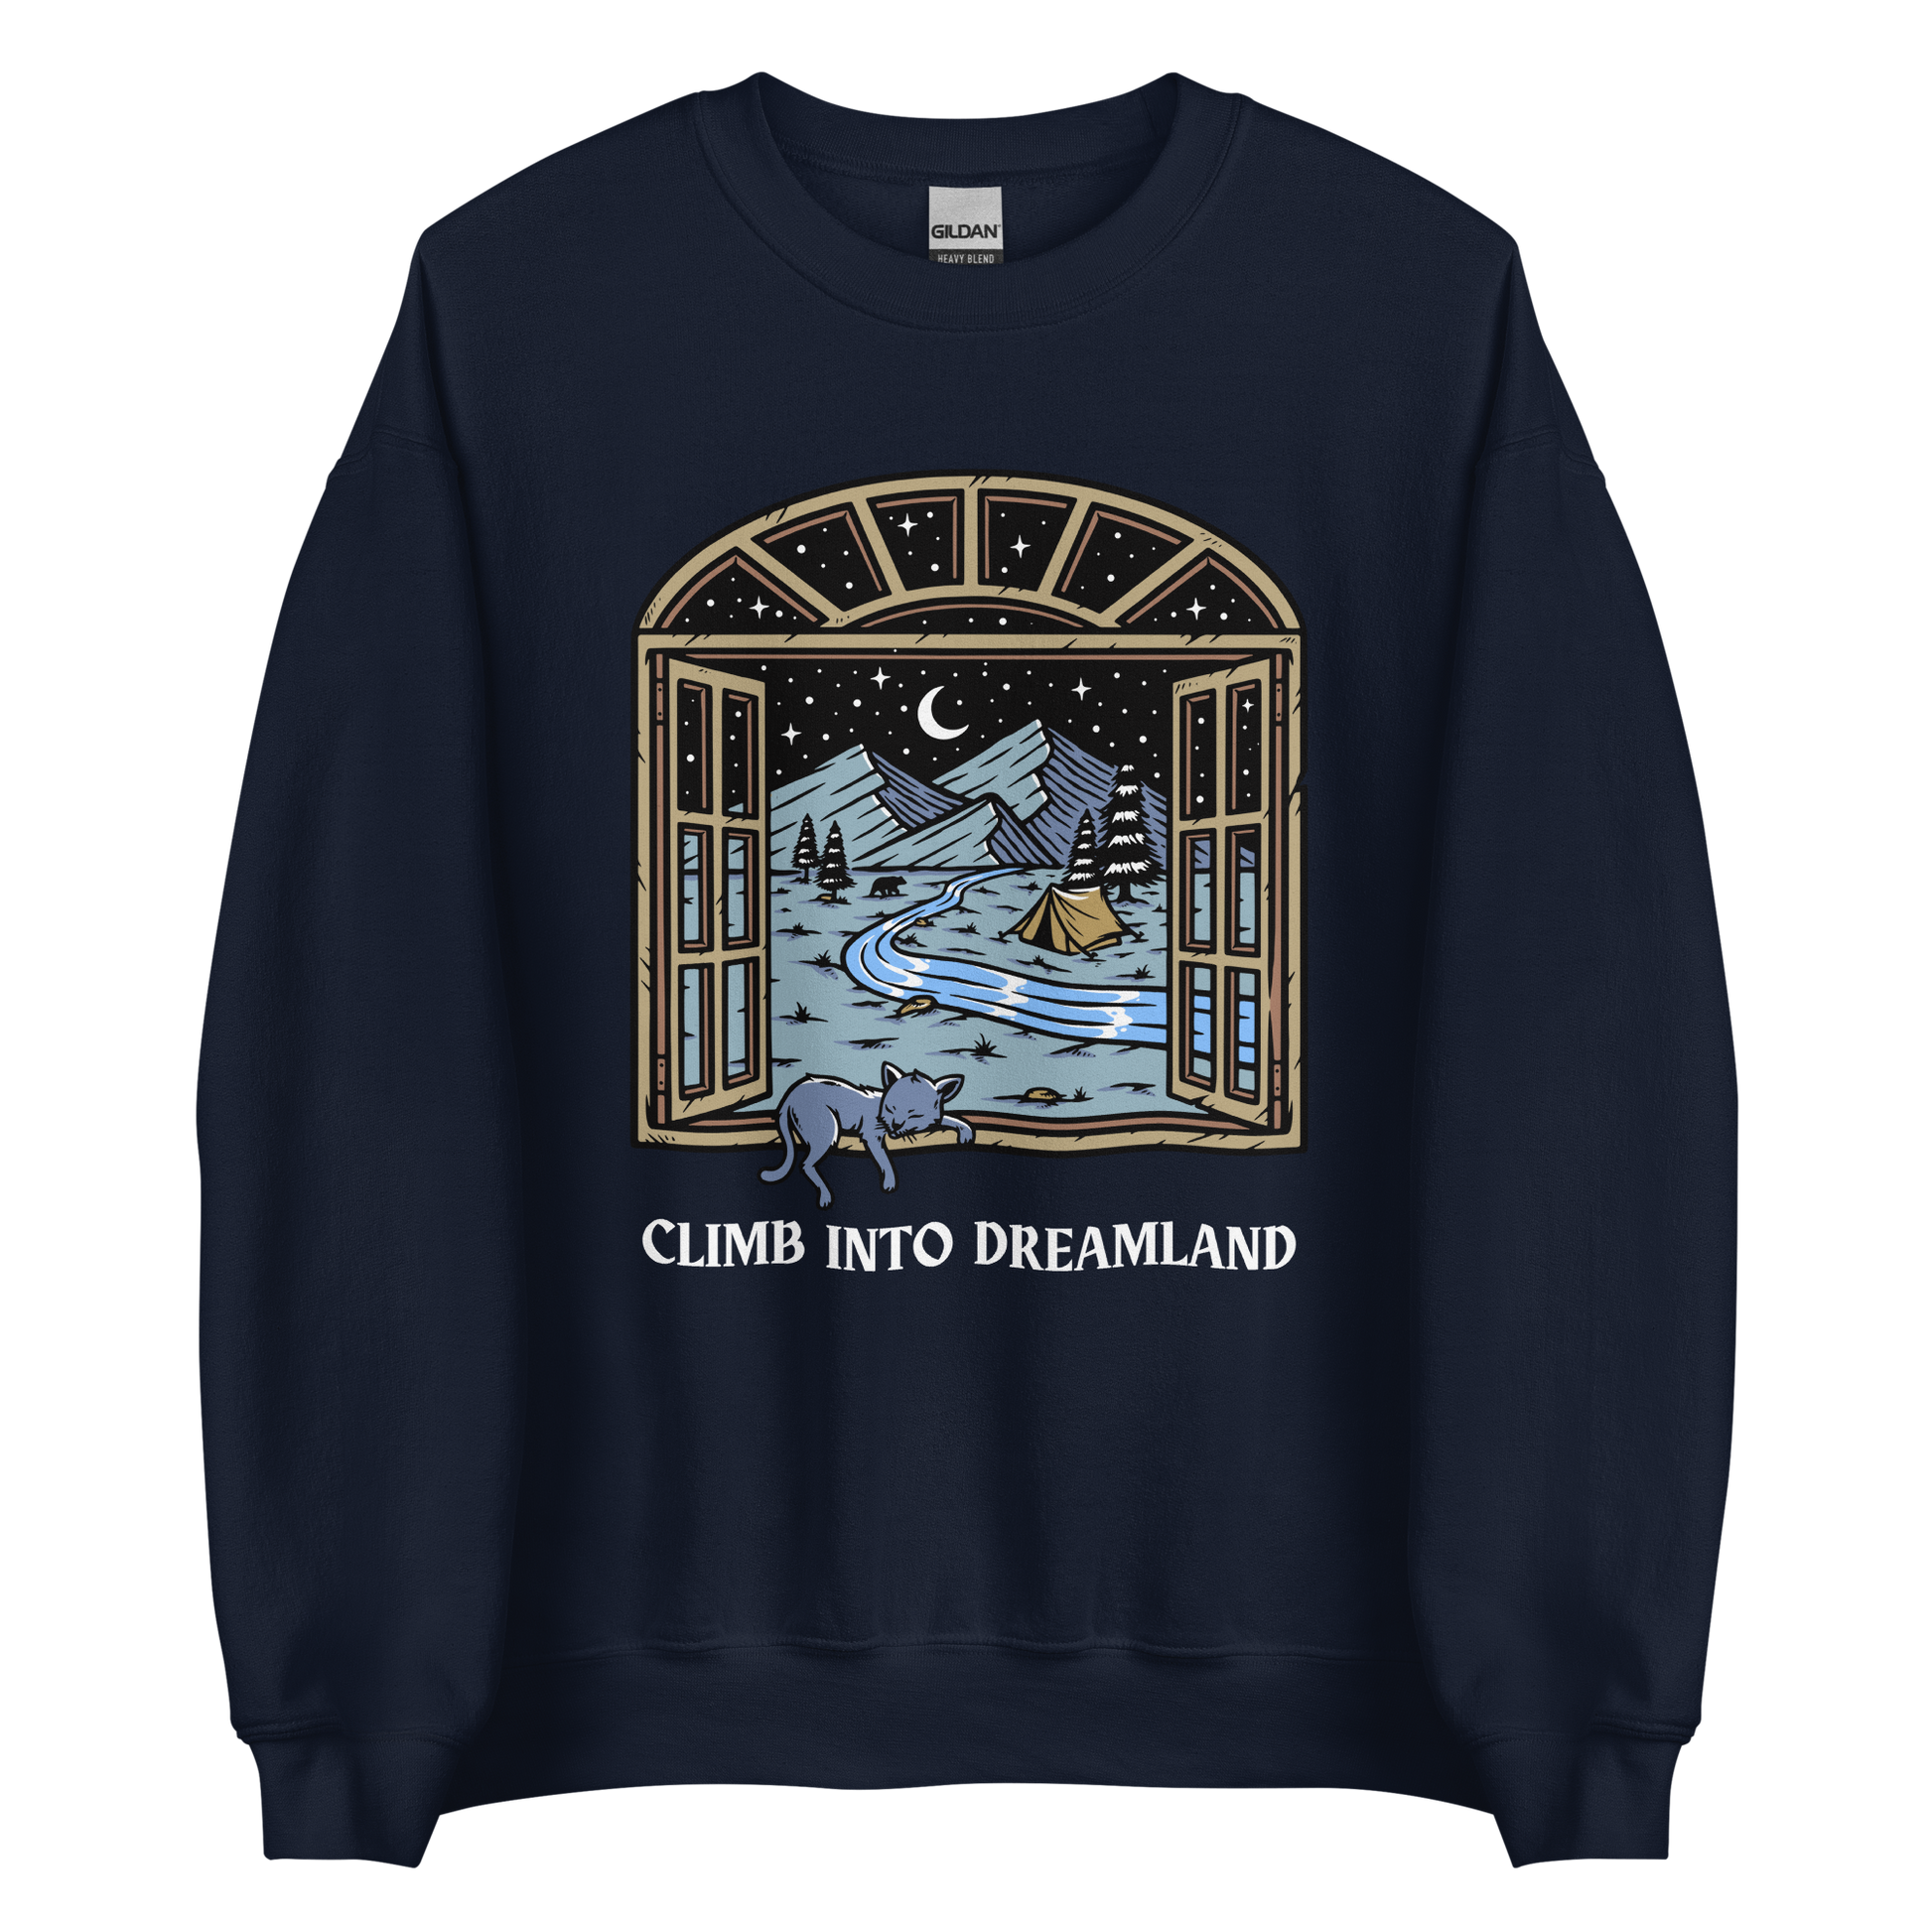 Navy Climb Into Dreamland Sweatshirt featuring a mesmerizing mountain view graphic on the chest - Cool Graphic Nature Sweatshirts - Boozy Fox